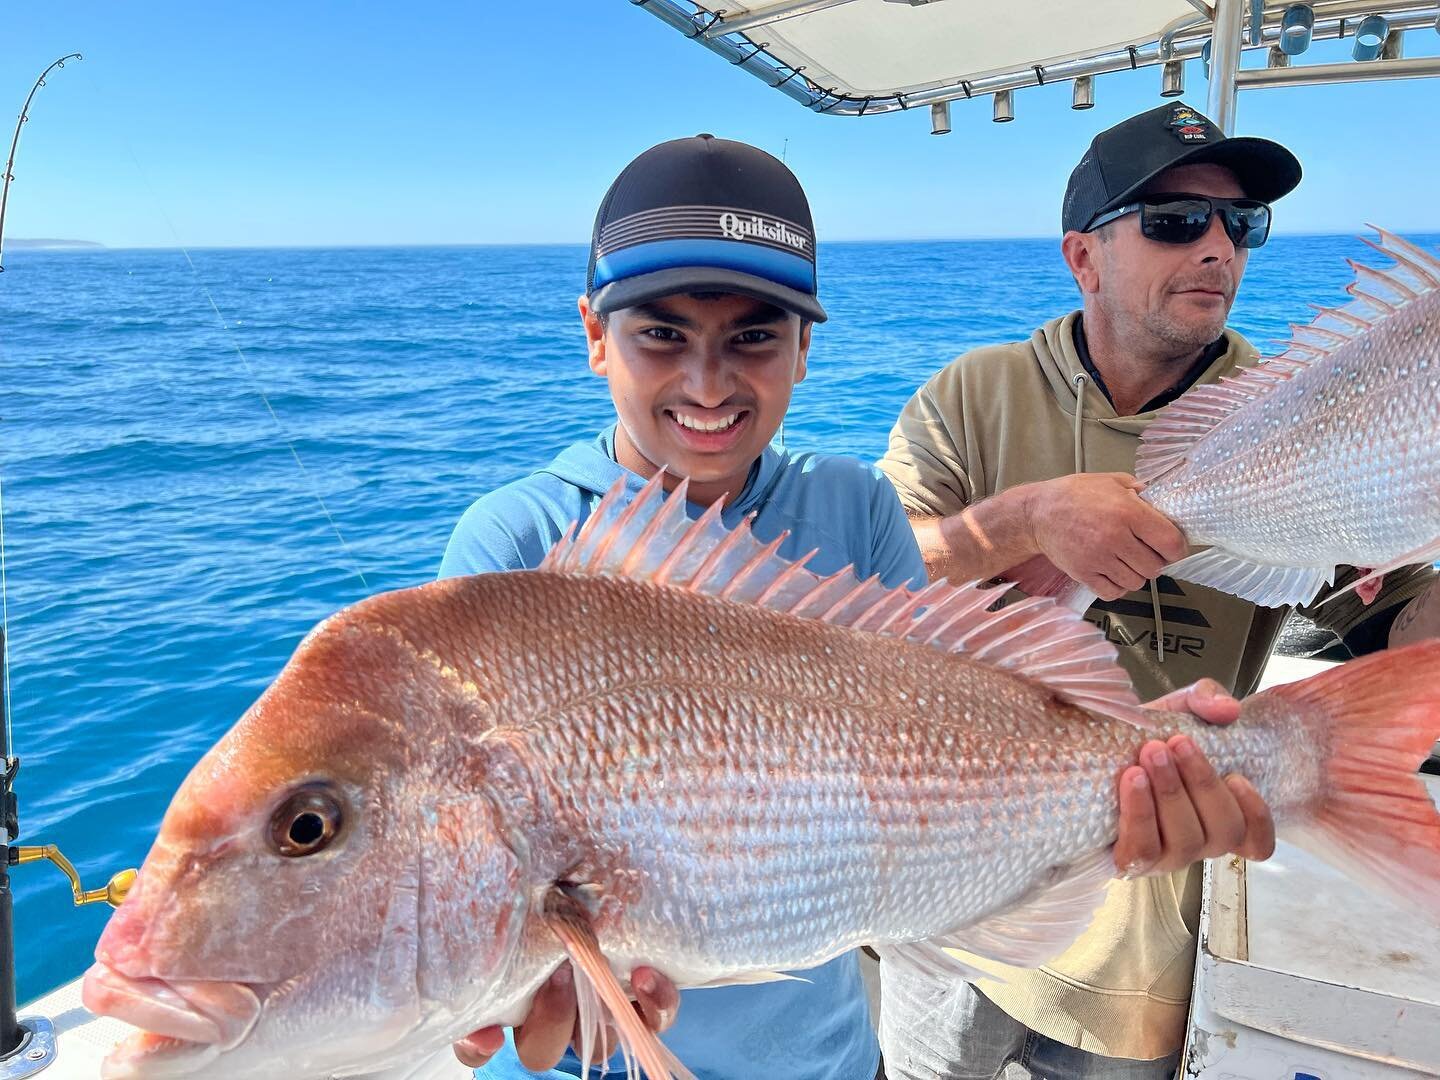 There were some beautiful snapper caught on charter today. #snapper #apollobay #nicefish #bookwithus